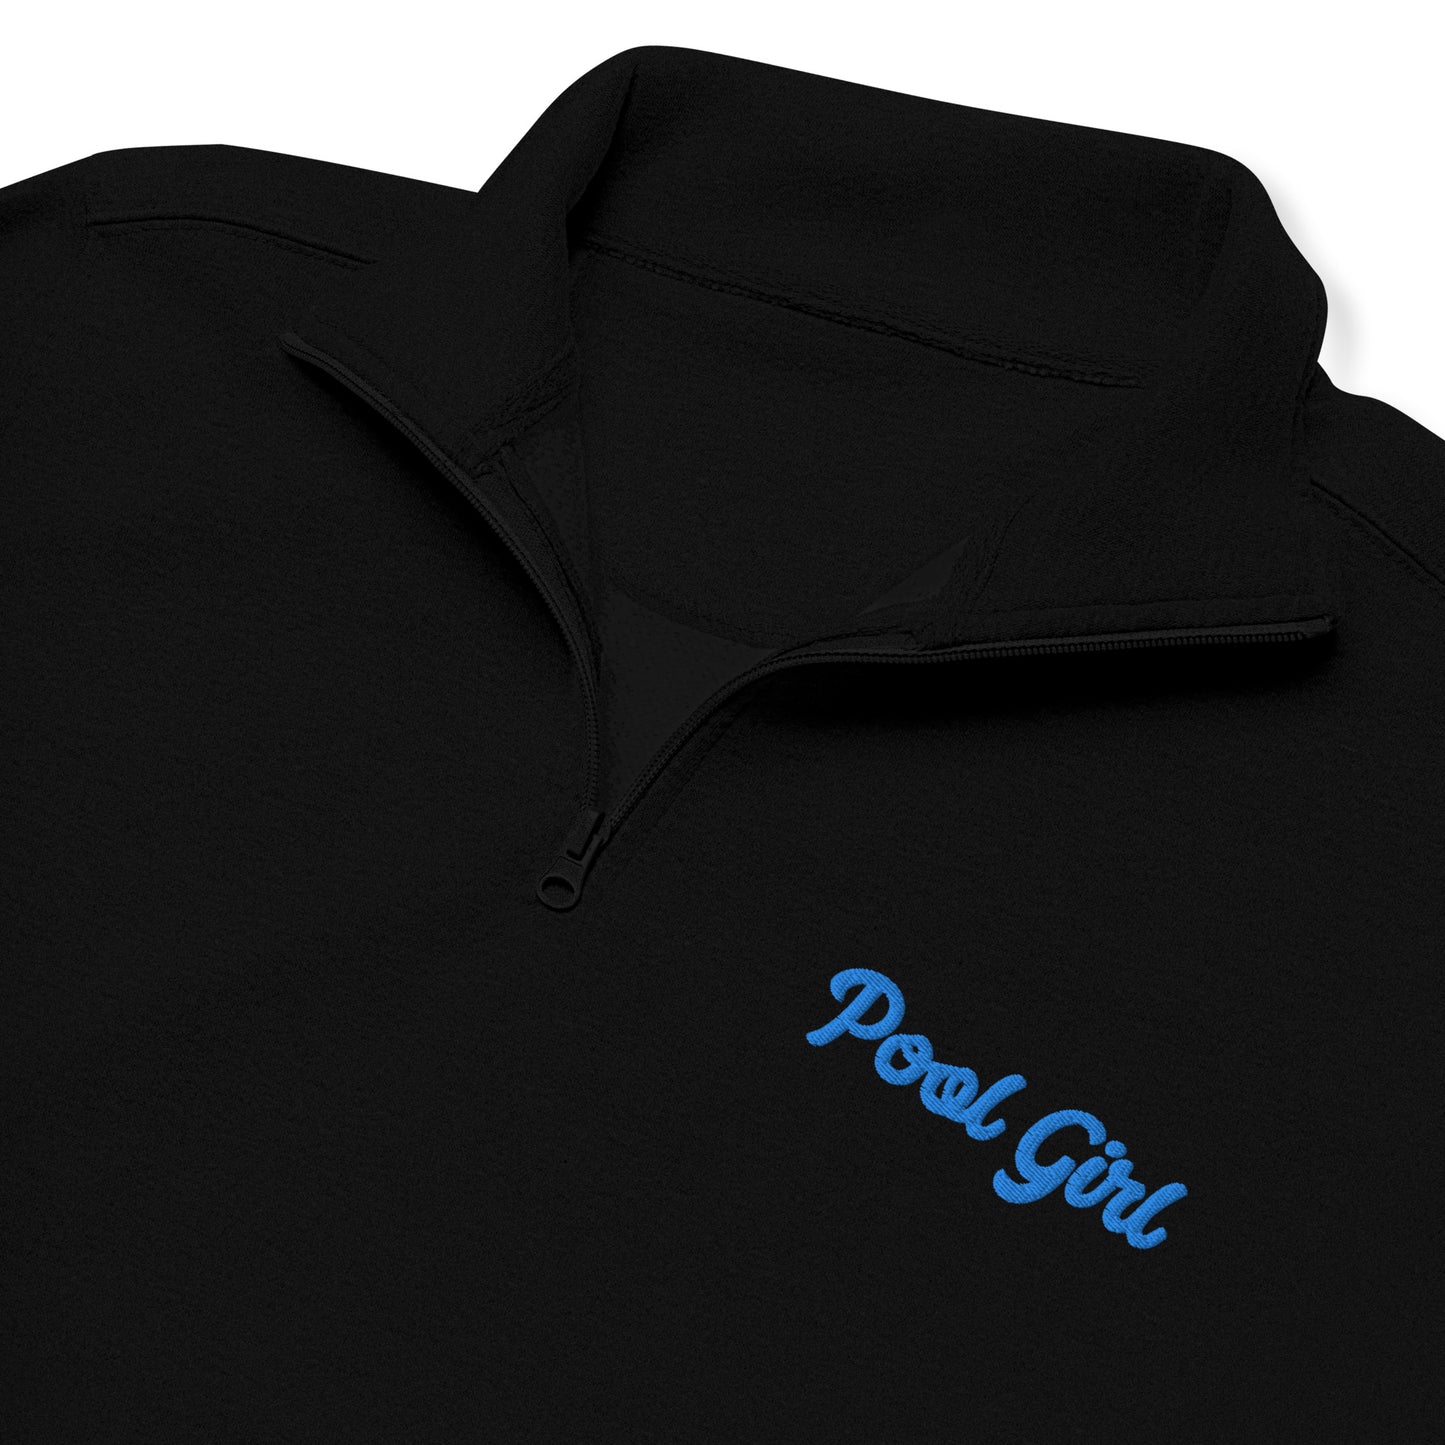 Pool Girl Embroidered Unisex Fleece Pullover